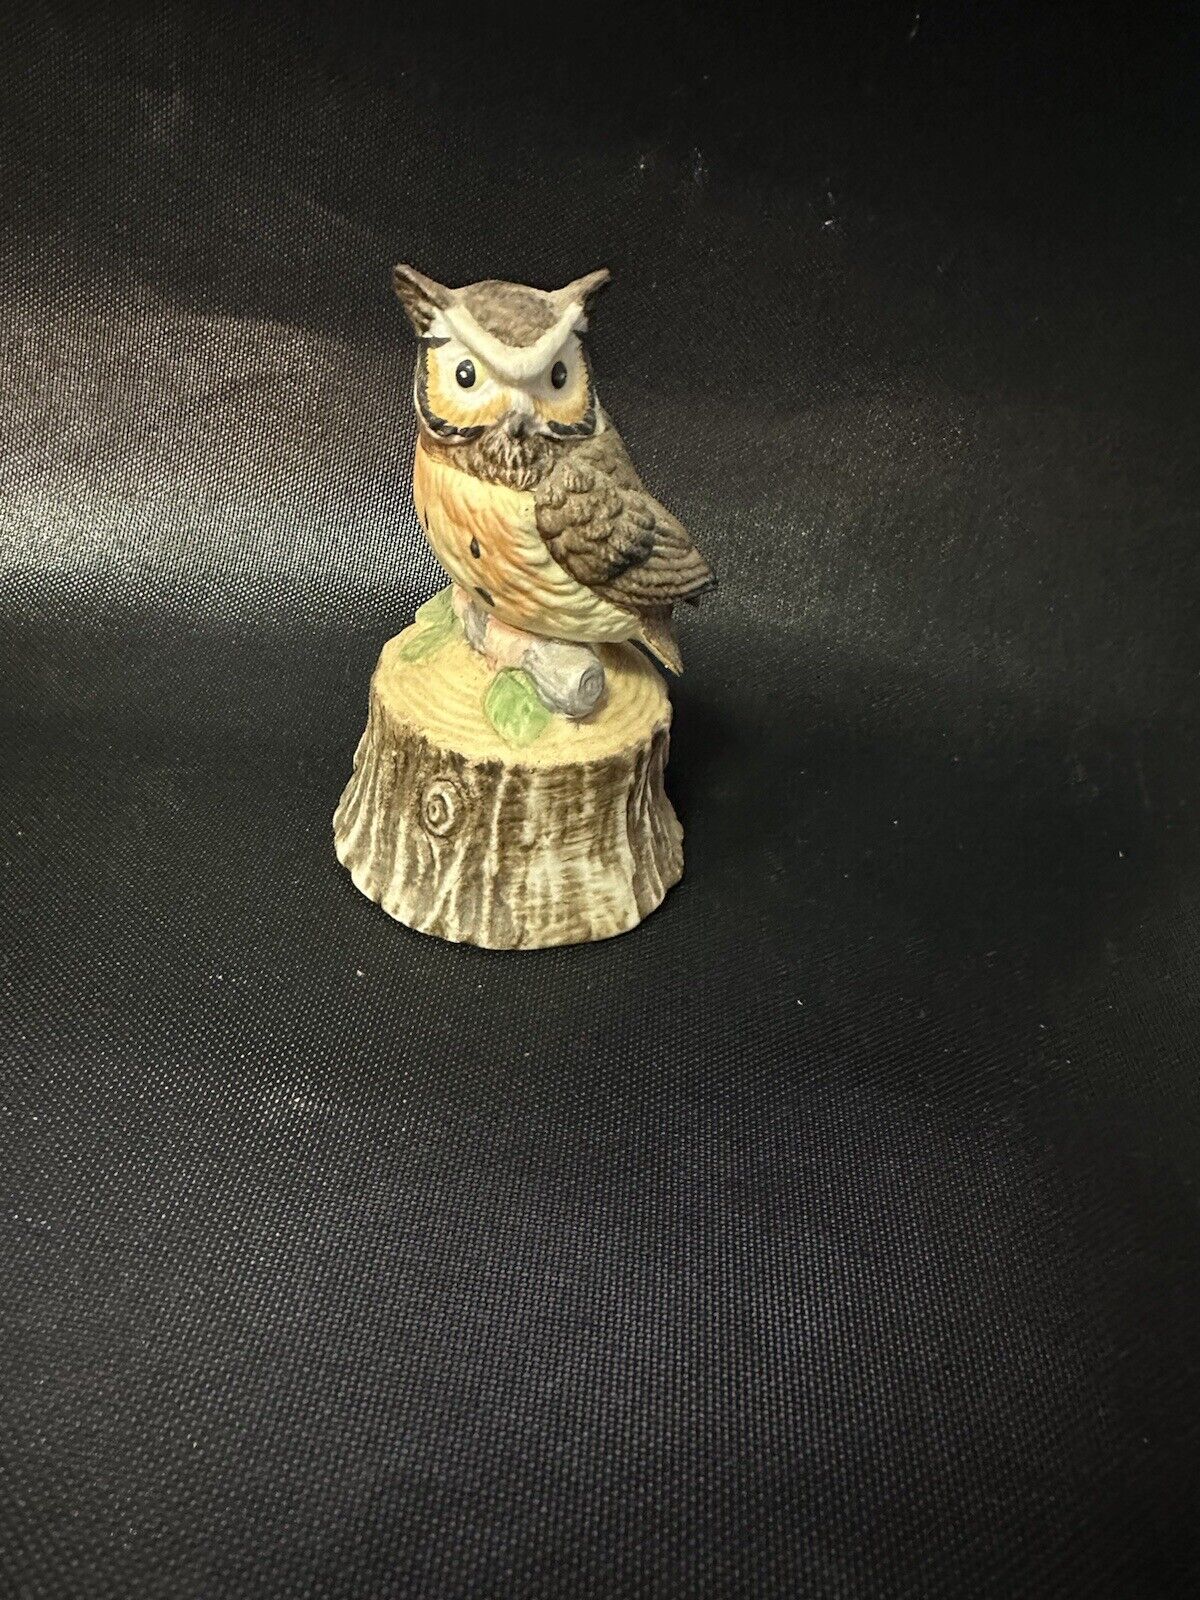 Lefton China Owl Bell - Owl On Tree Stump - #02035 - Excellent Condition - 3.5”